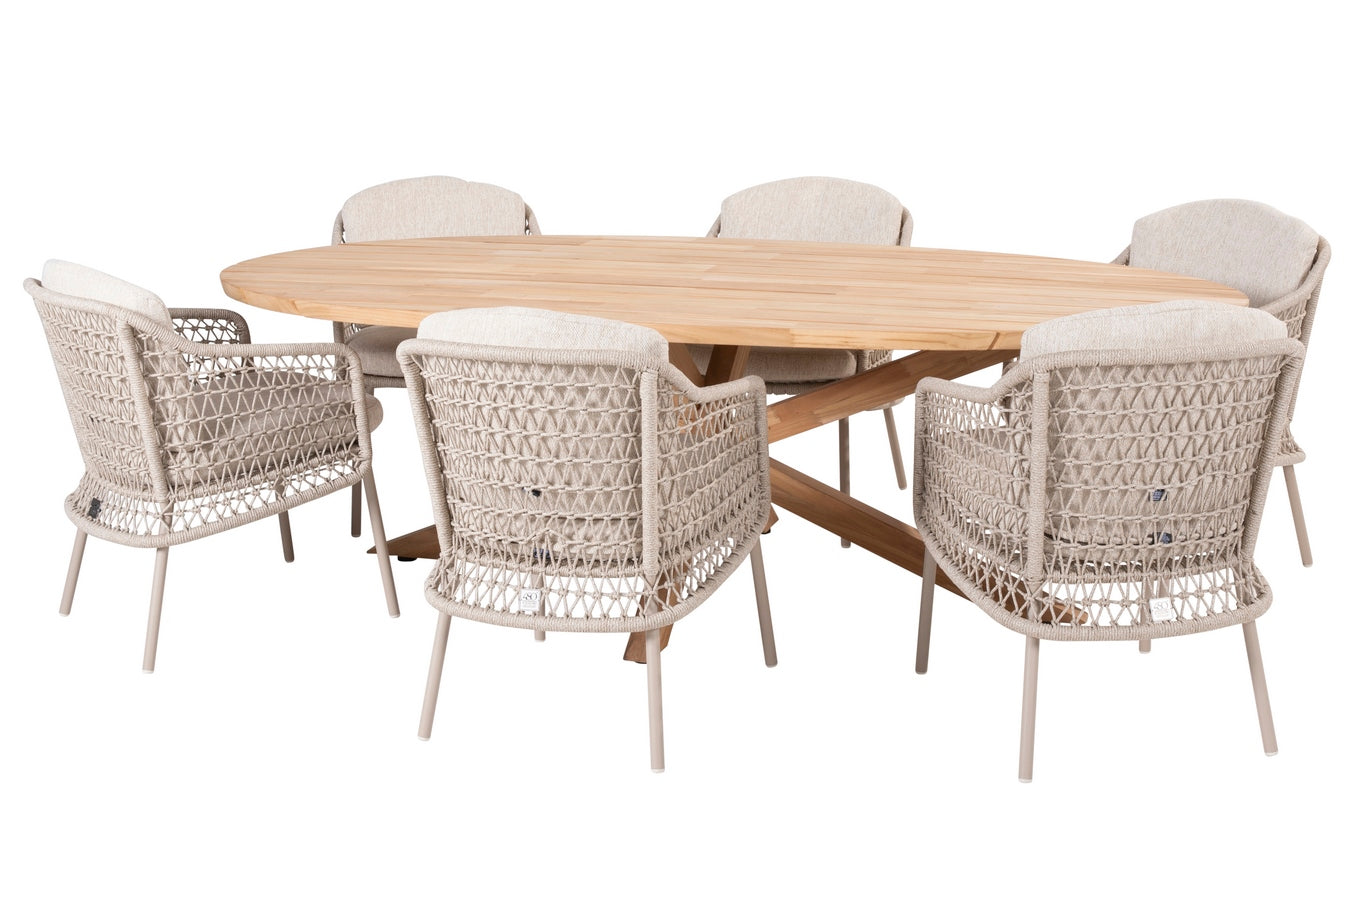 4 Seasons Outdoor Puccini Dining With Prado 240cm Ellipse Table Set